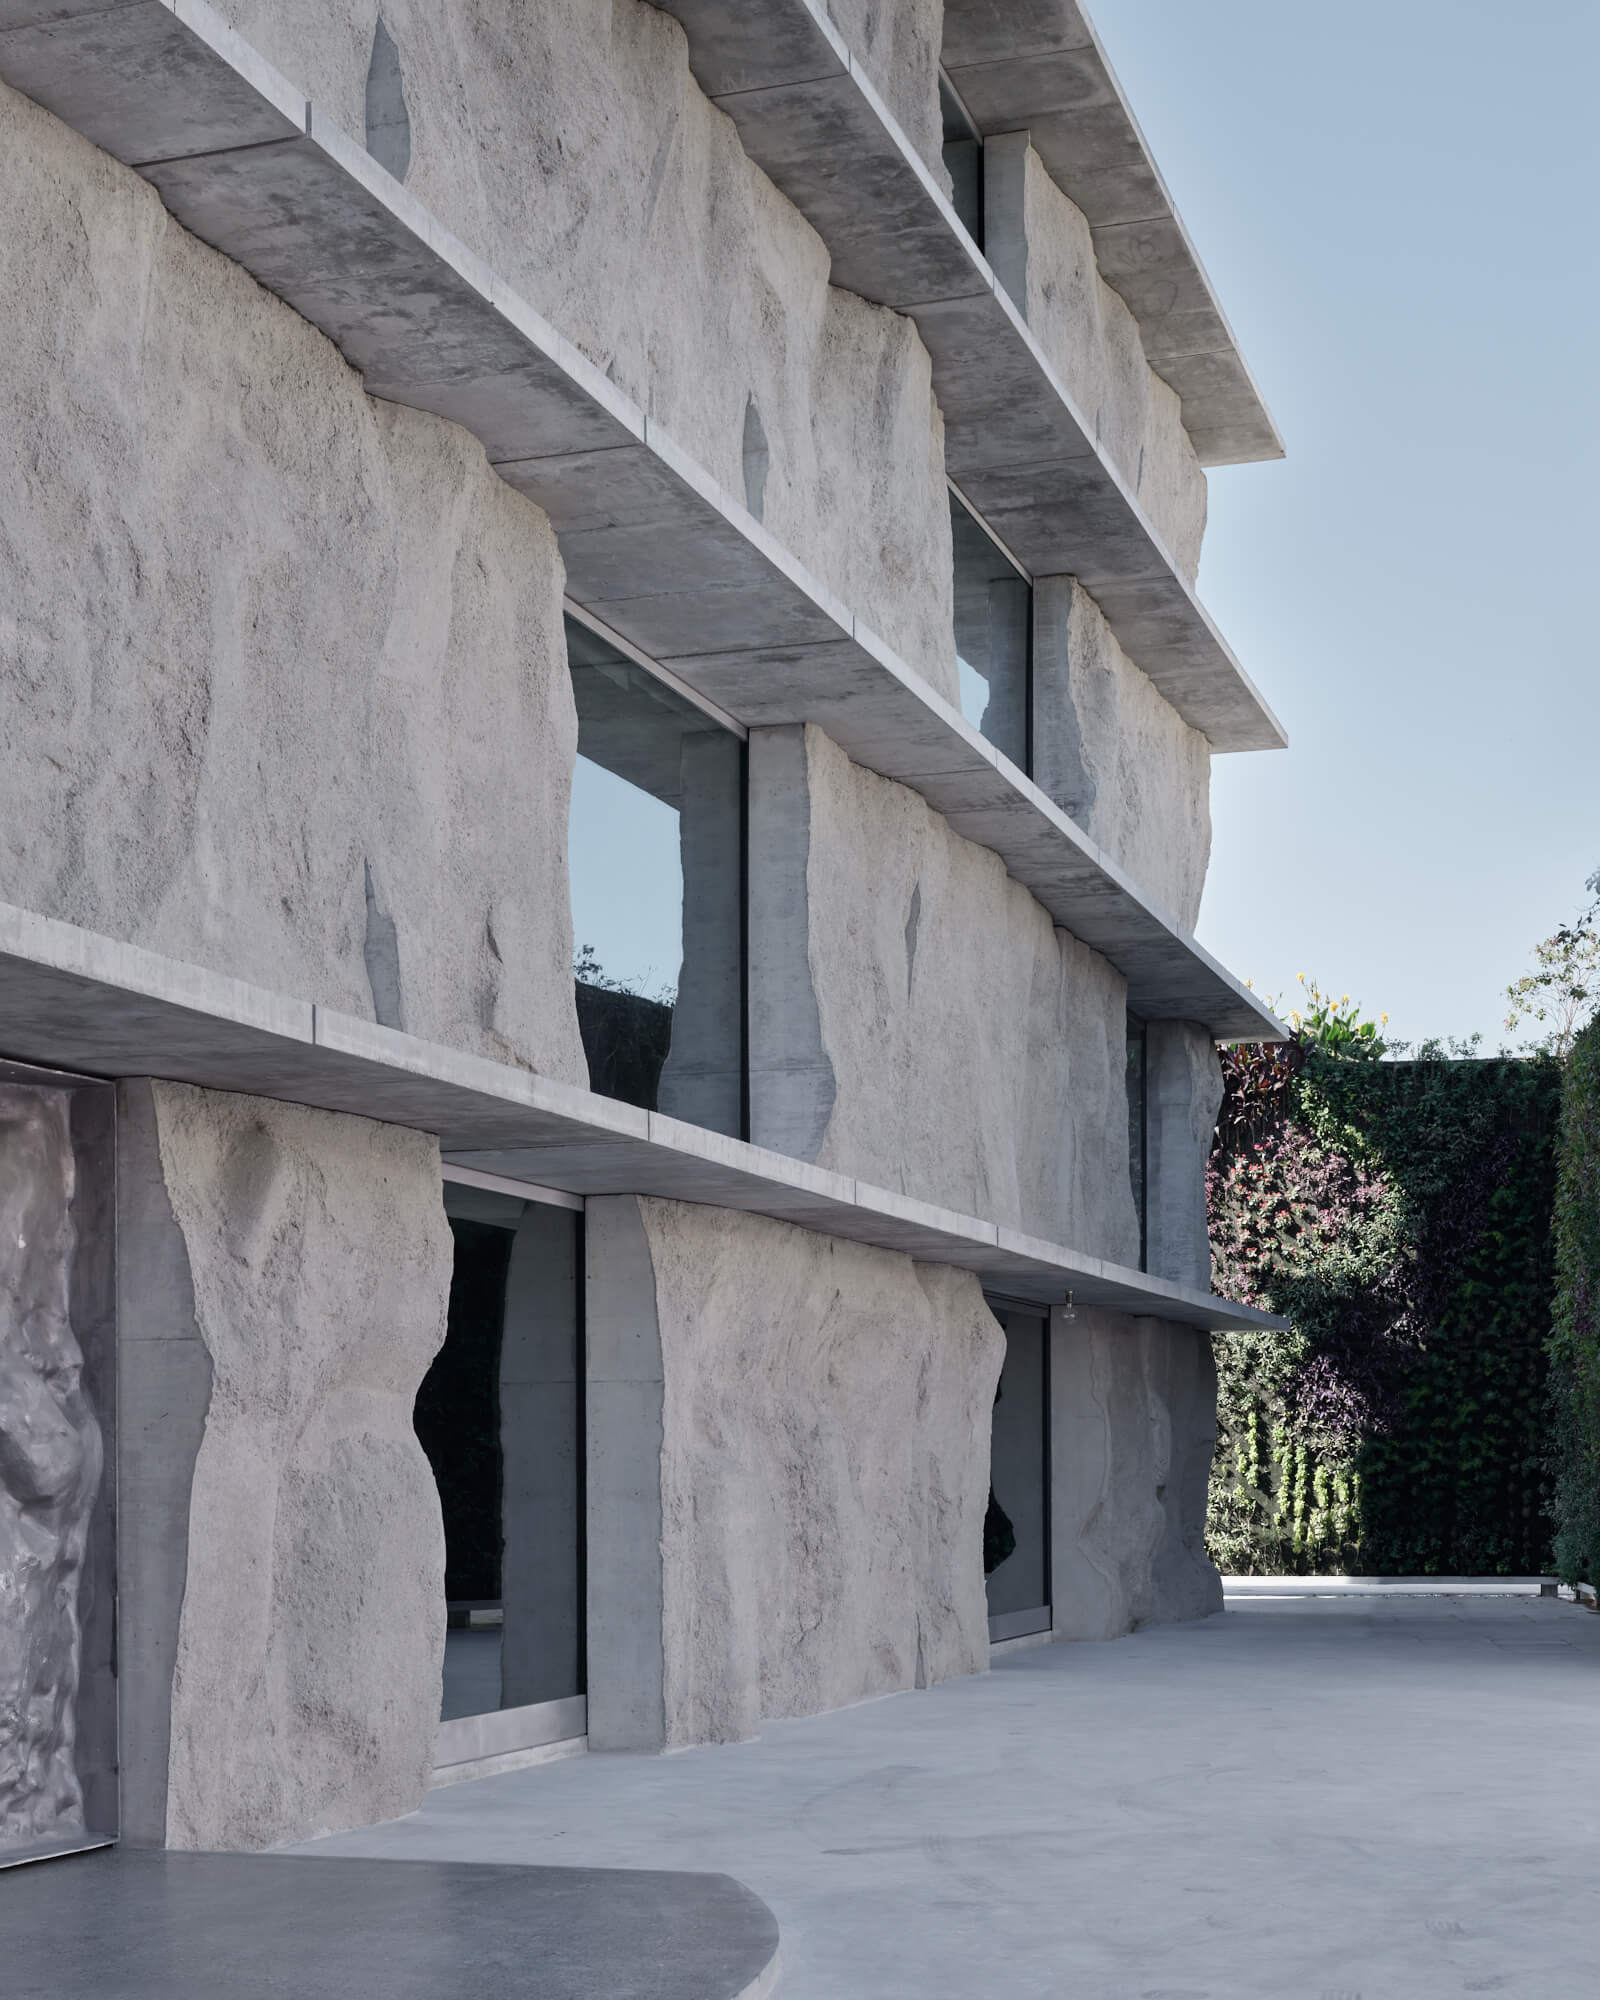 Vertical image of a stone building designed by Studio Anne Holtrop with rough slabs between floors